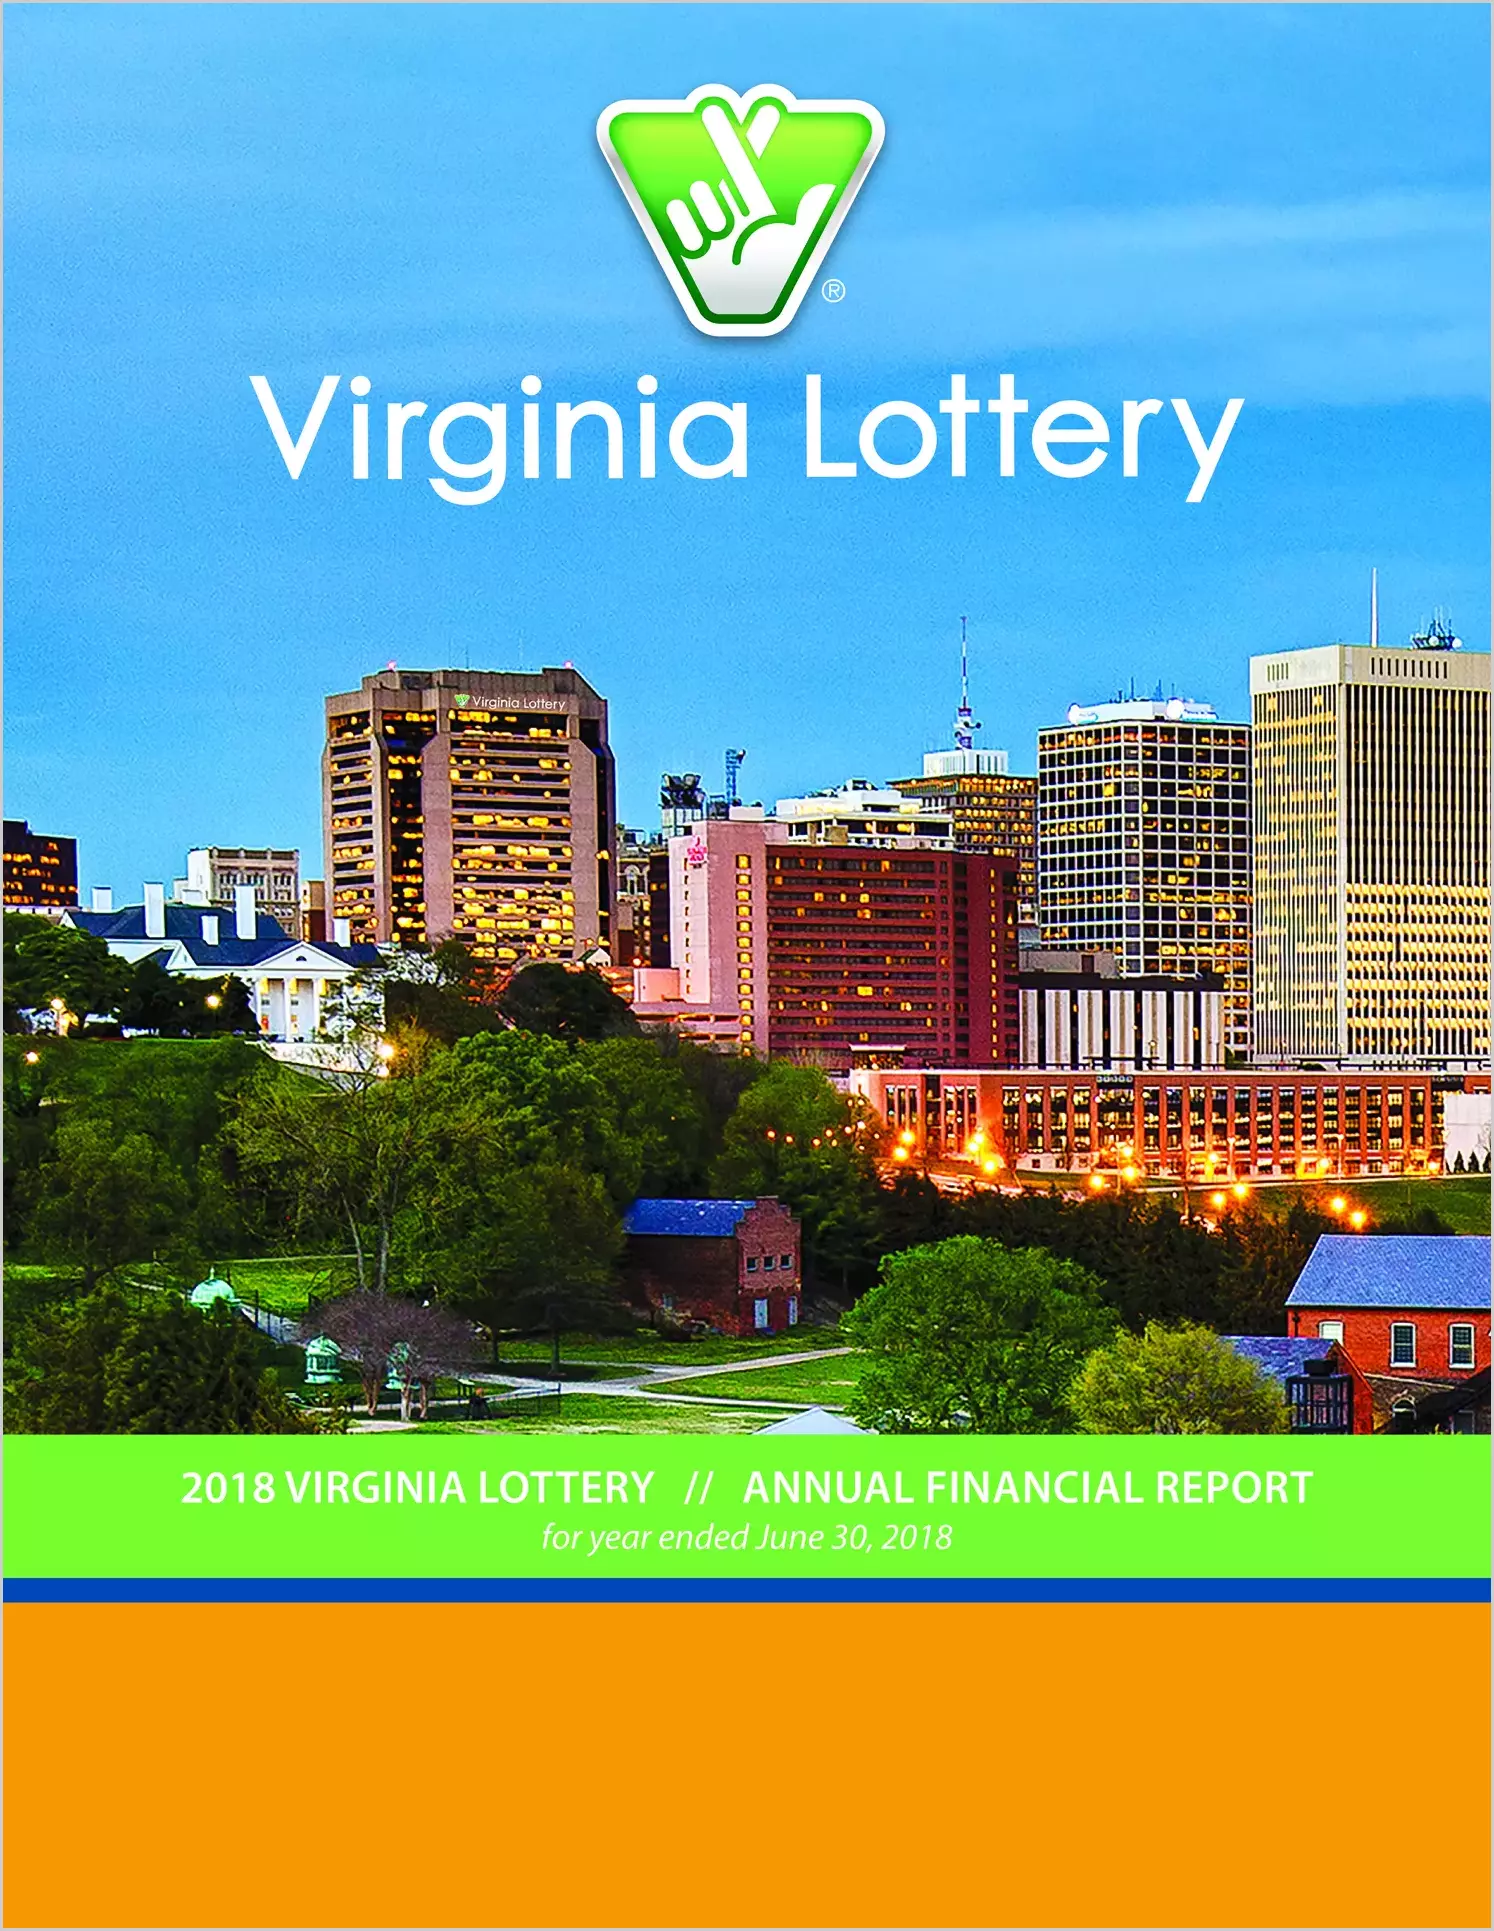 Virginia Lottery Financial Statements for the year ended June 30, 2018